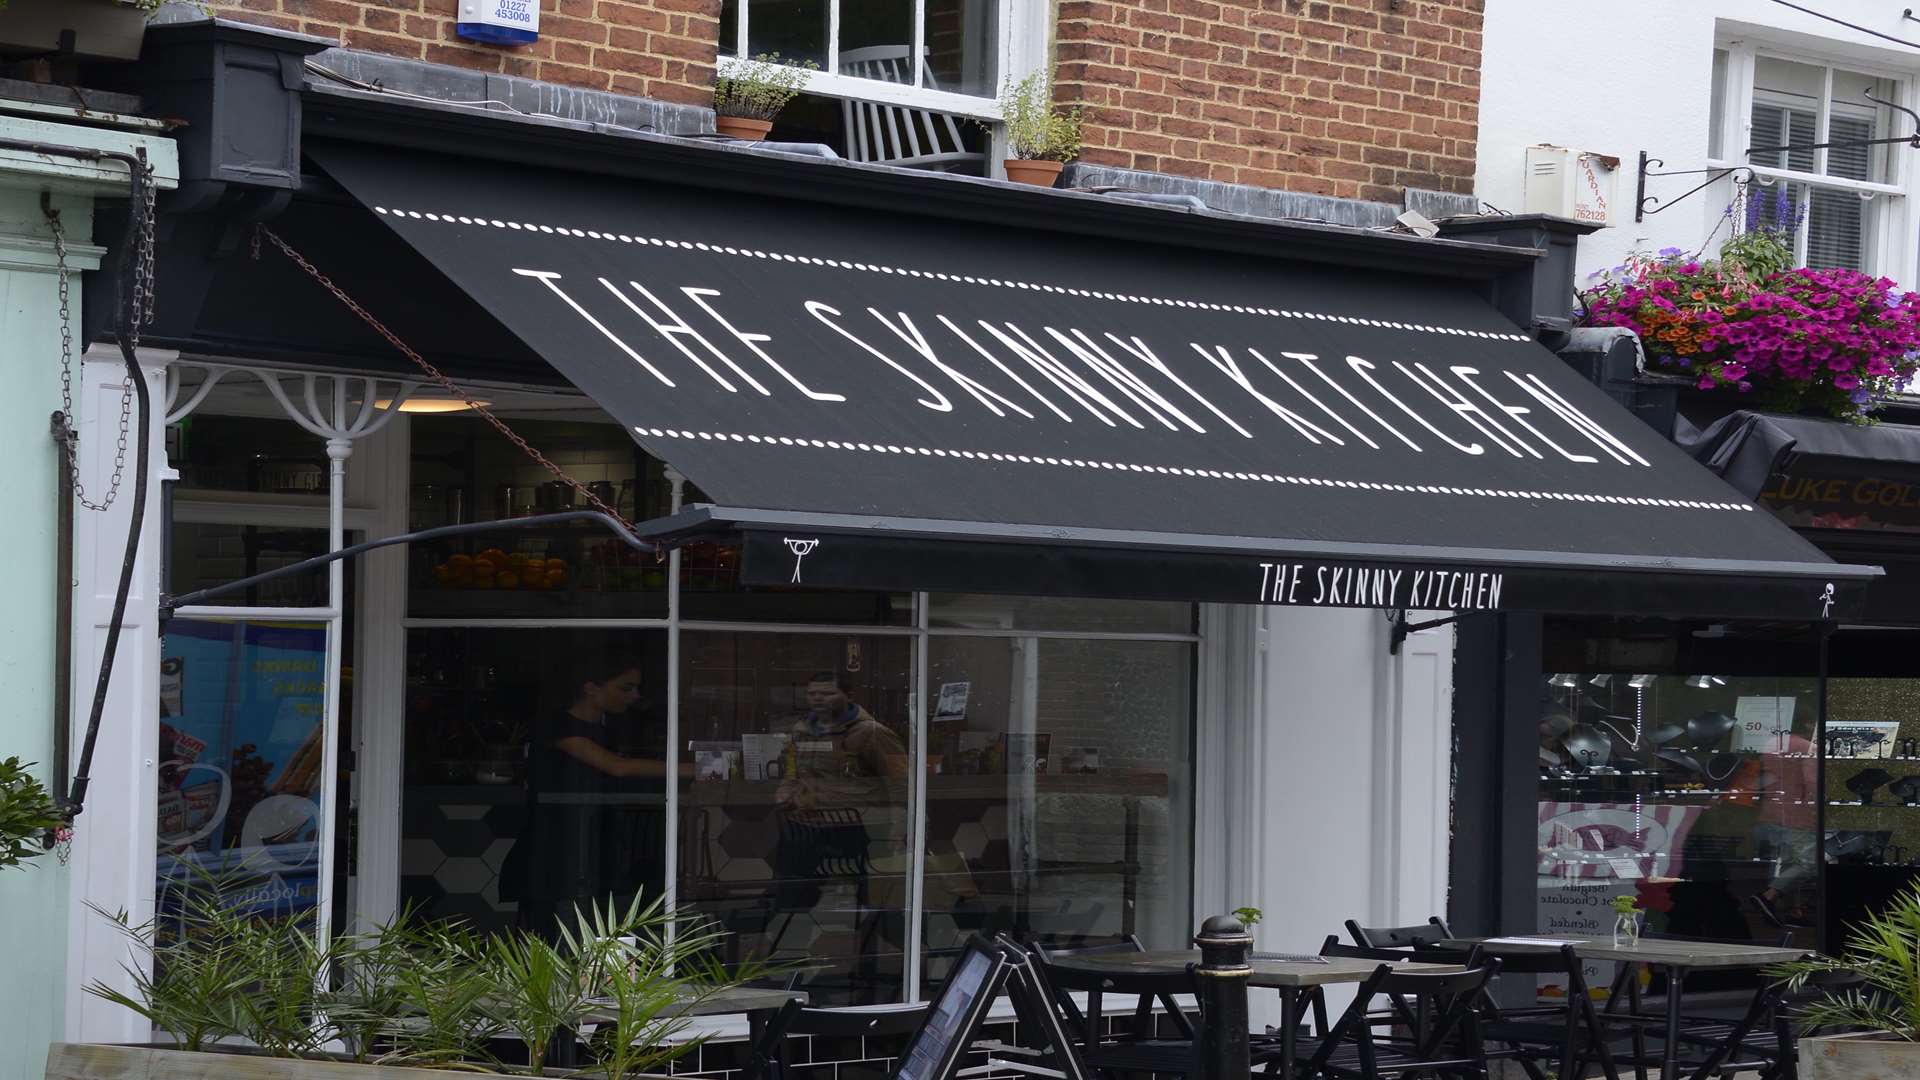 The Skinny Kitchen in Canterbury has vegan options for Veganuary